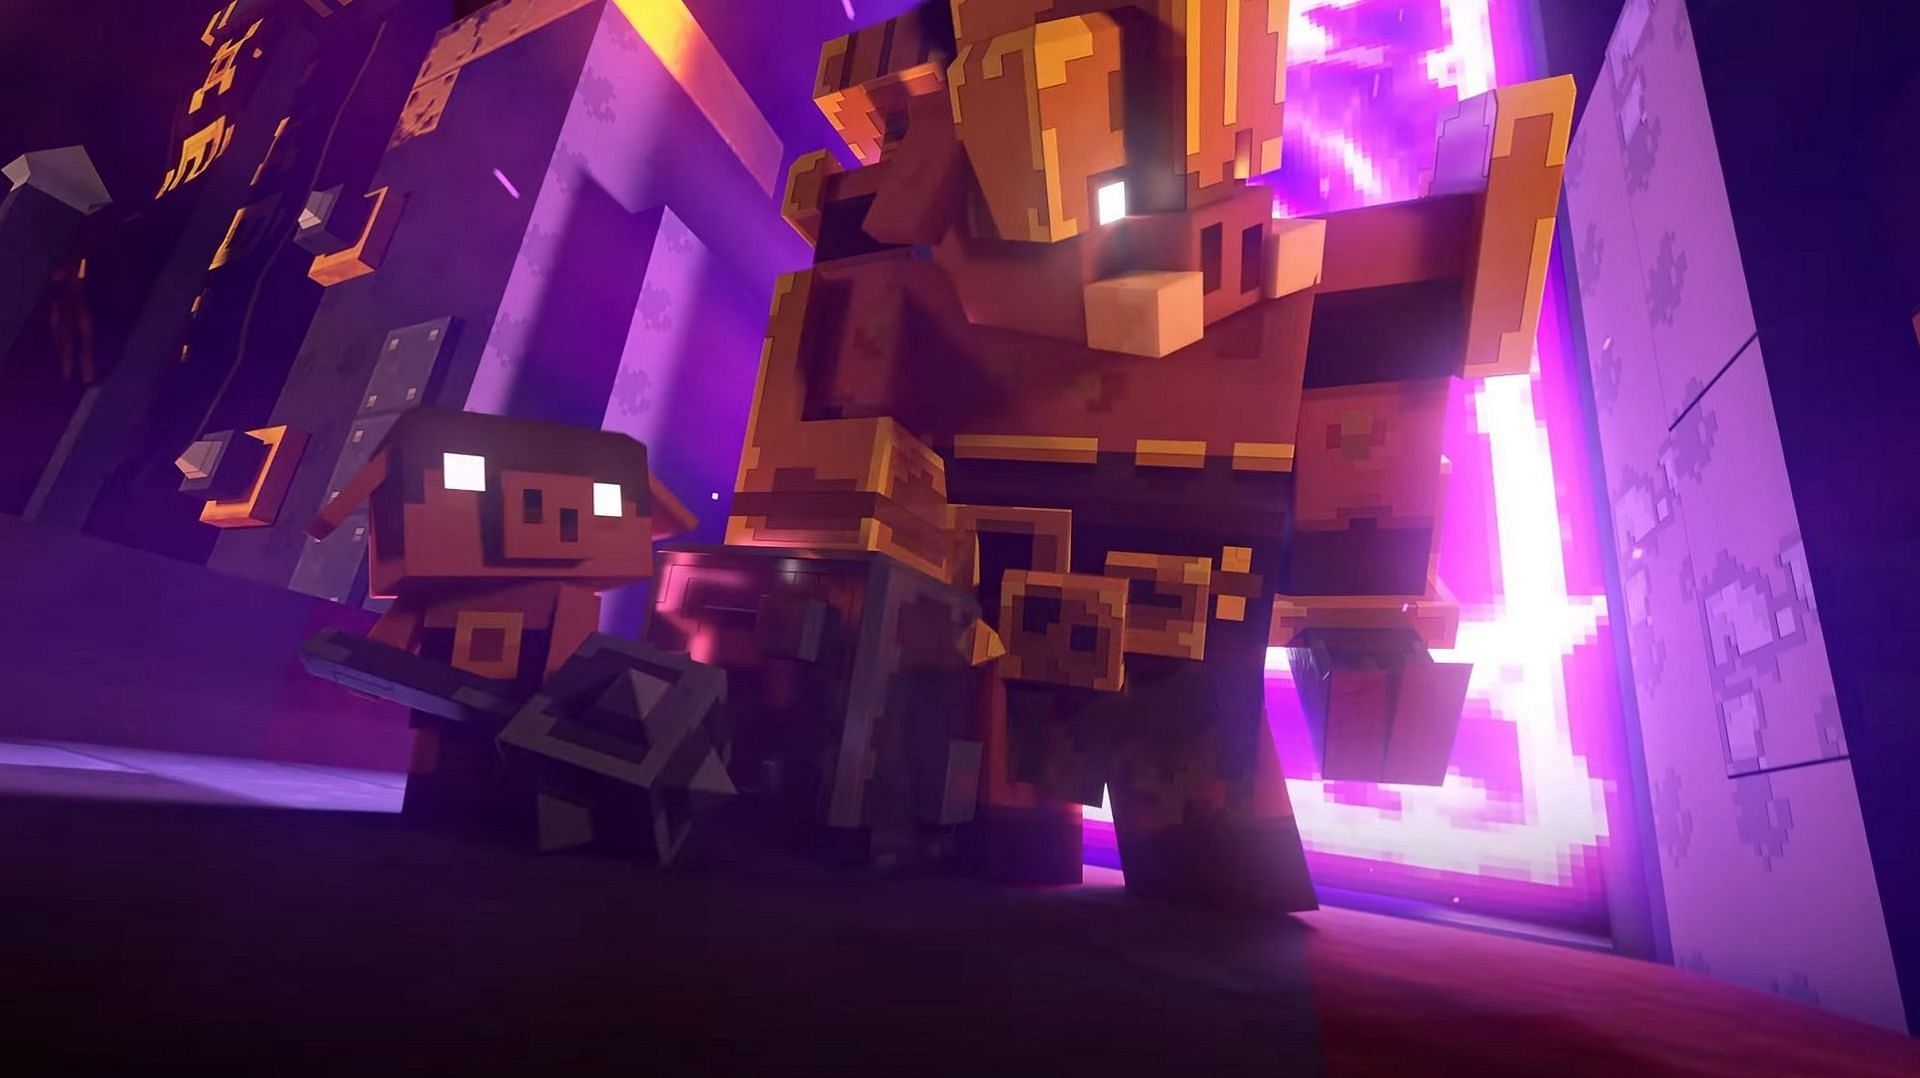 The piglin armies are ready for war in Minecraft Legends (Image via Mojang)